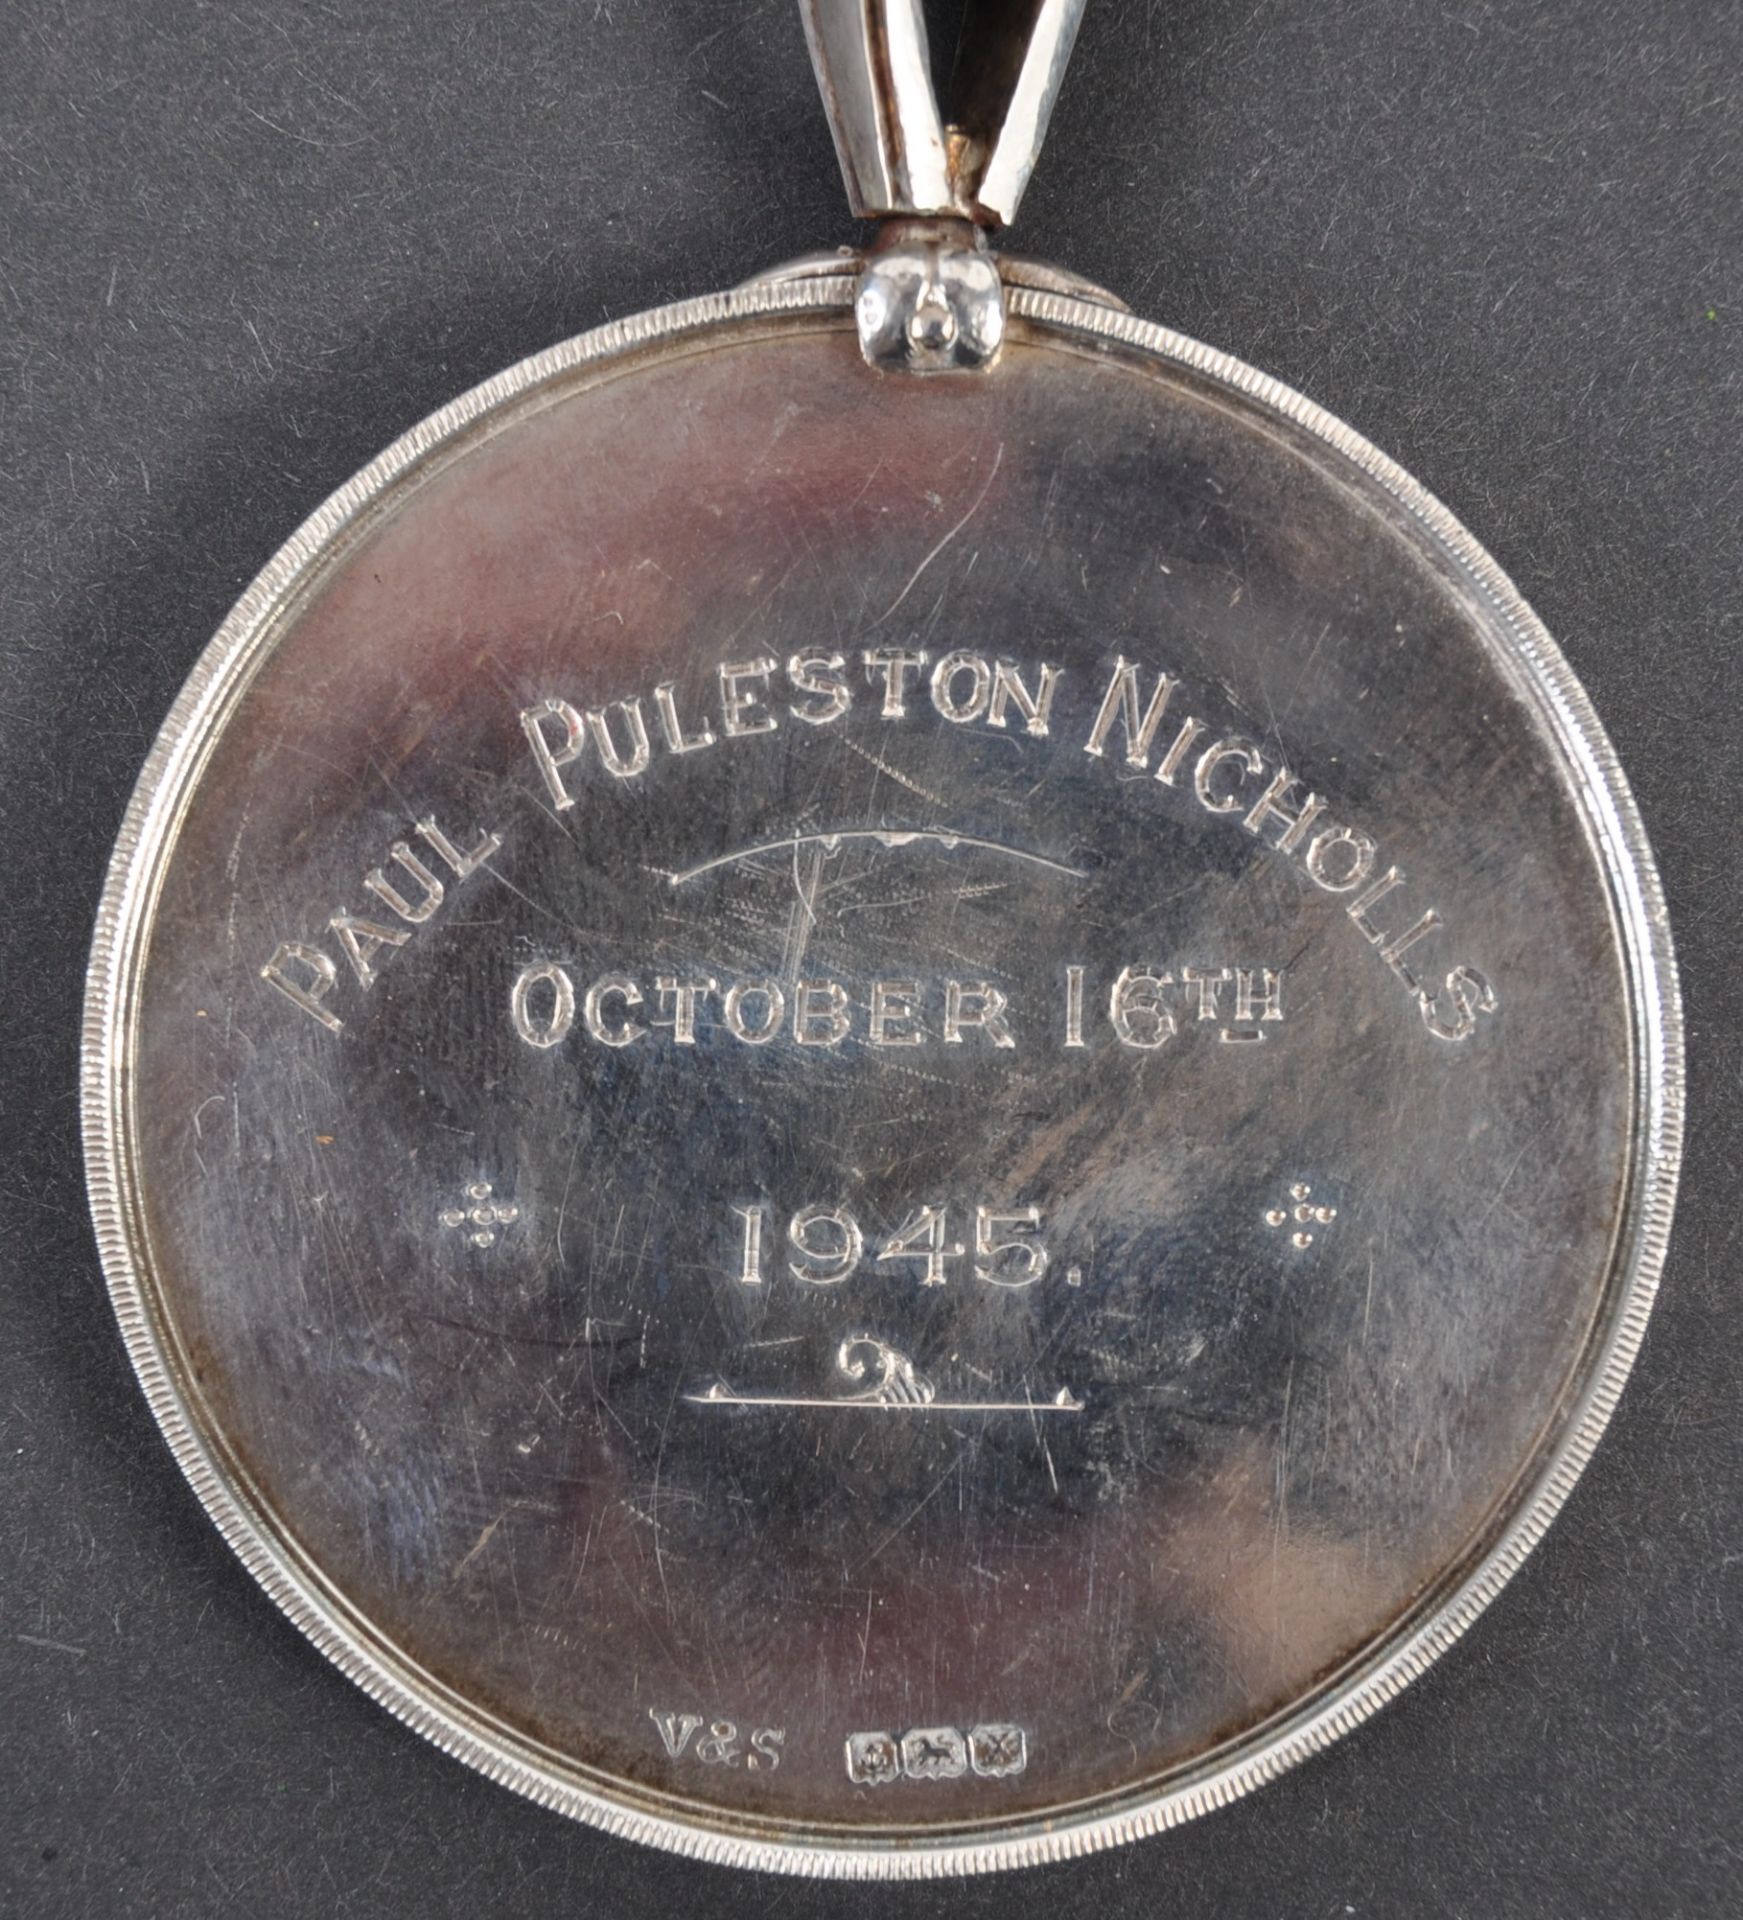 COLLECTION OF ANTIQUE MEDALLIONS - 1945 WORSHIPFUL COMPANY OF DISTILLERS - Image 3 of 4